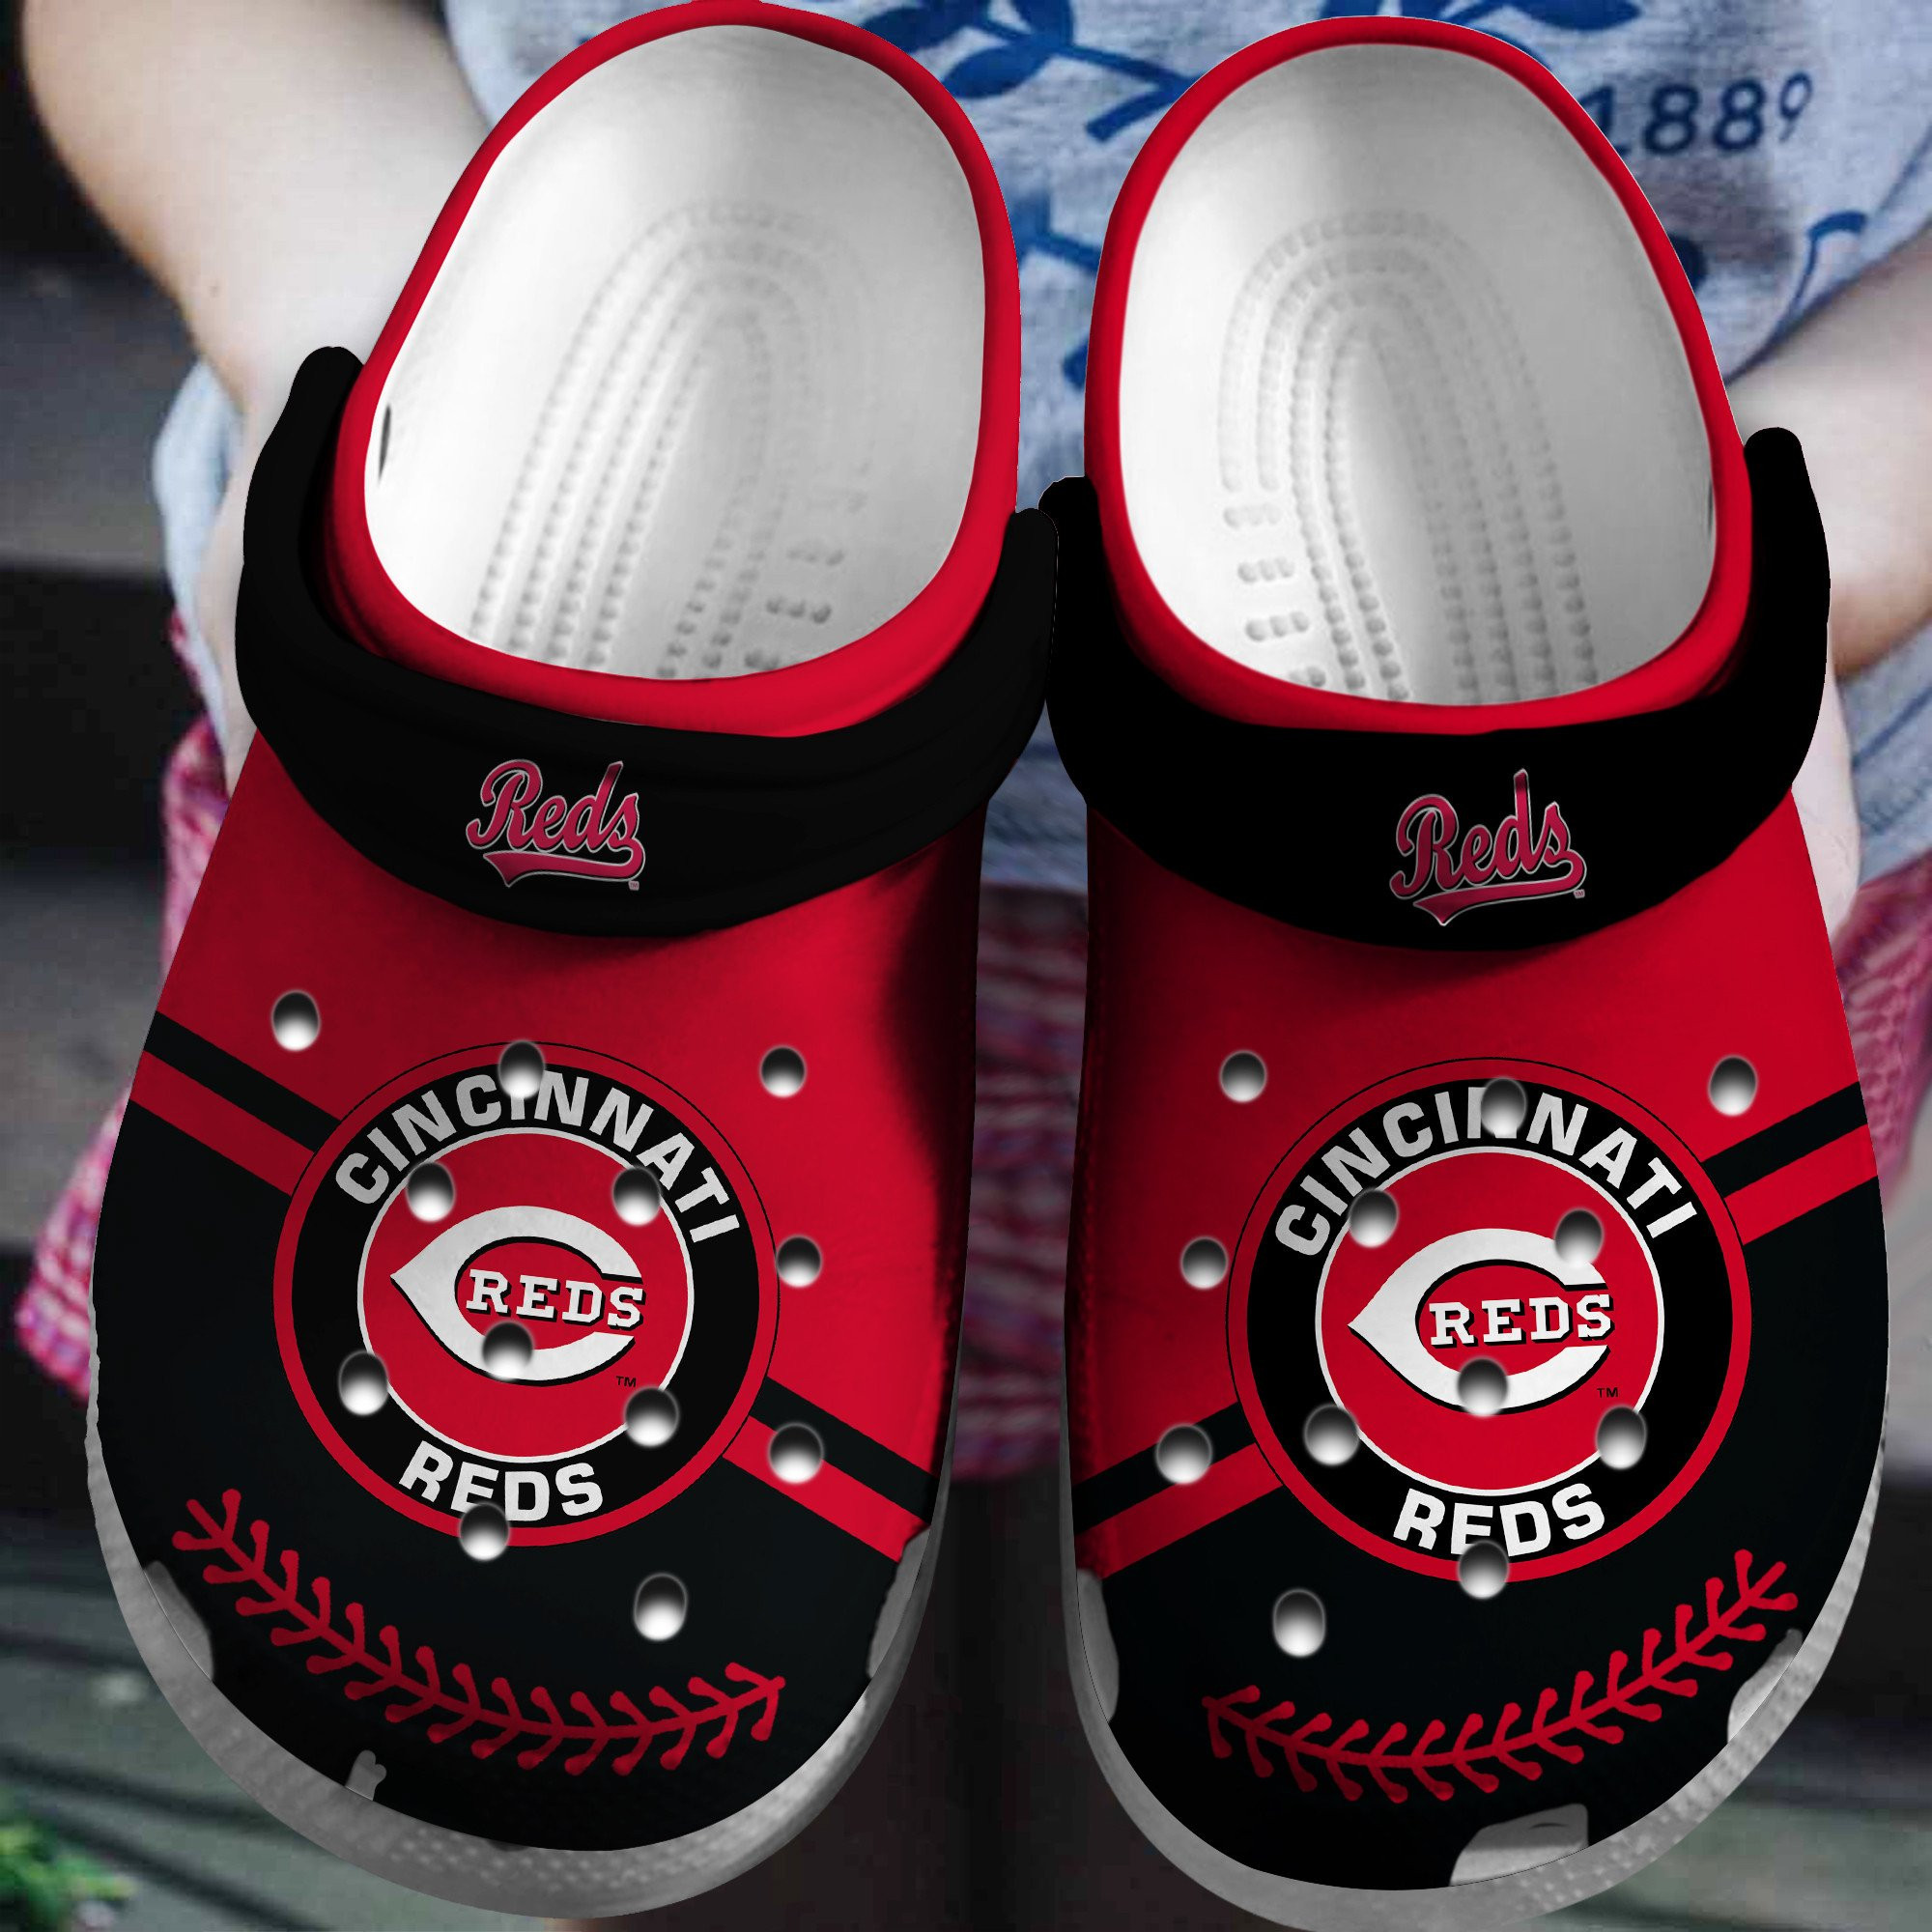 Hot Mlb Team Cincinnati Reds Red-Black Crocs Clog Shoesshoes Trusted Shopping Online In The World